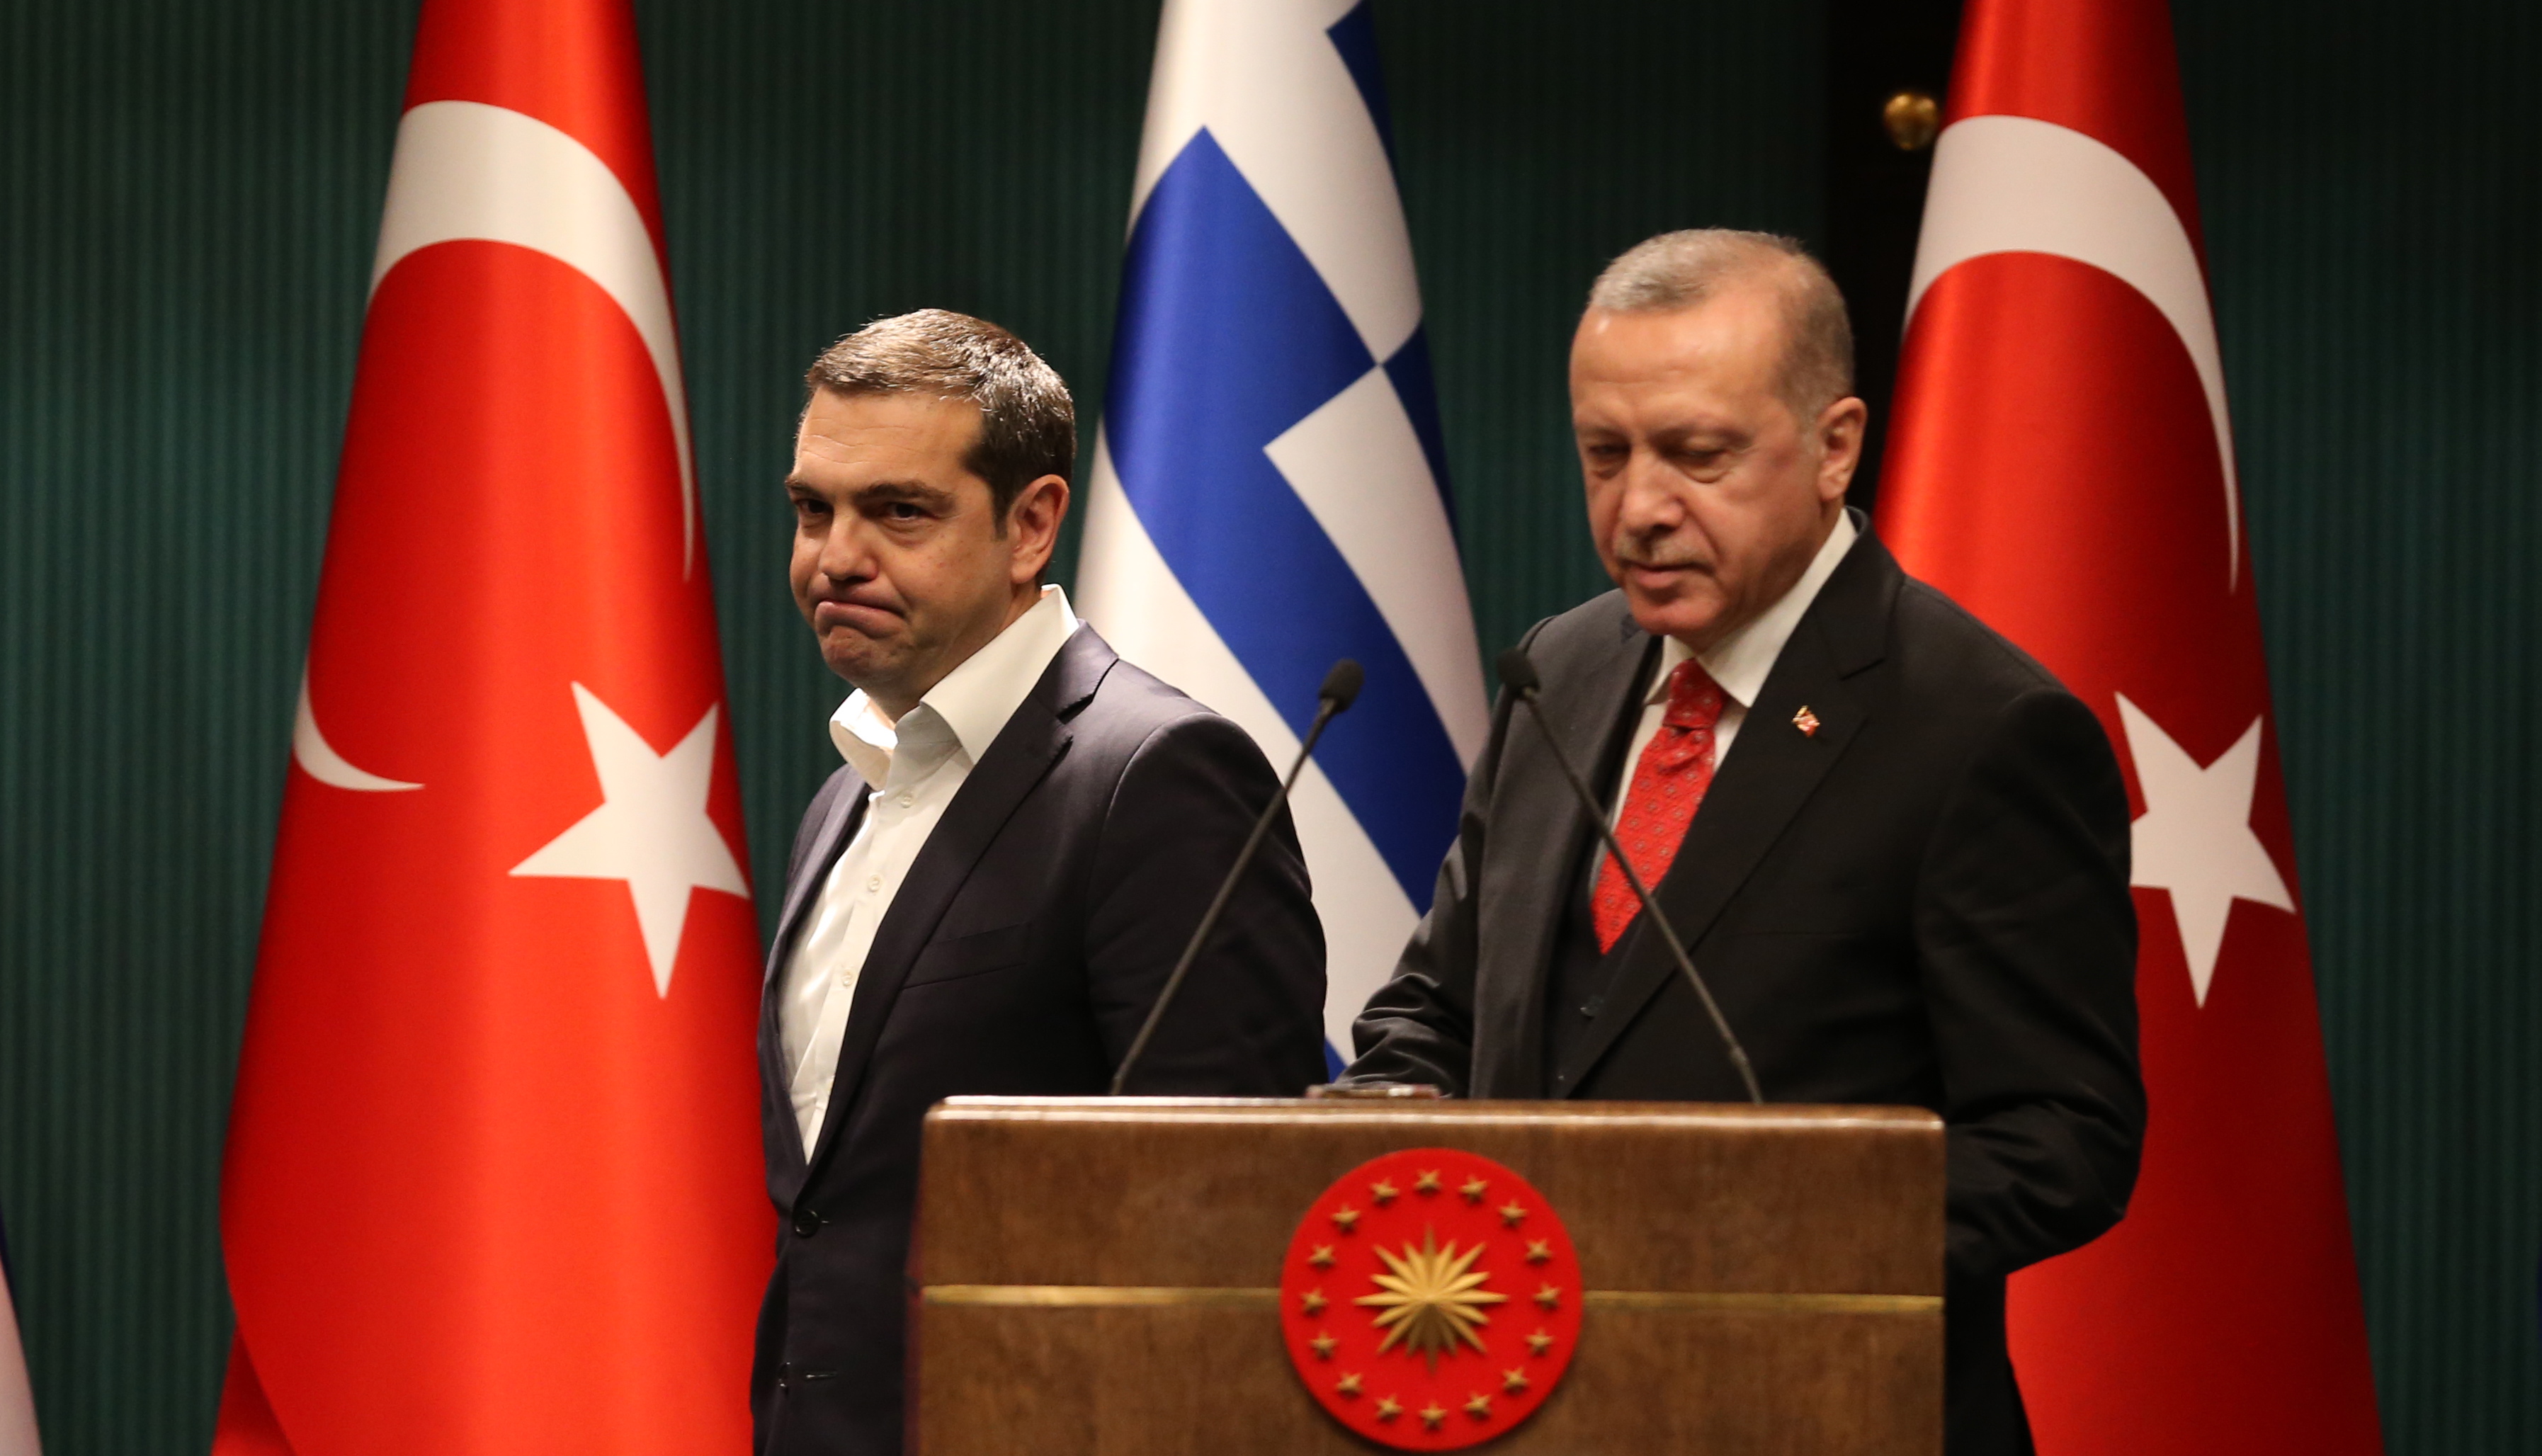 epa07345982 Turkish President Recep Tayyip Erdogan (R) and Greek Prime Minister Alexis Tsipras (L) attends a press conference after their meeting in Ankara, Turkey, 05 February 2019. Tsipras is in Turkey for a two-days official visit.  EPA/STR